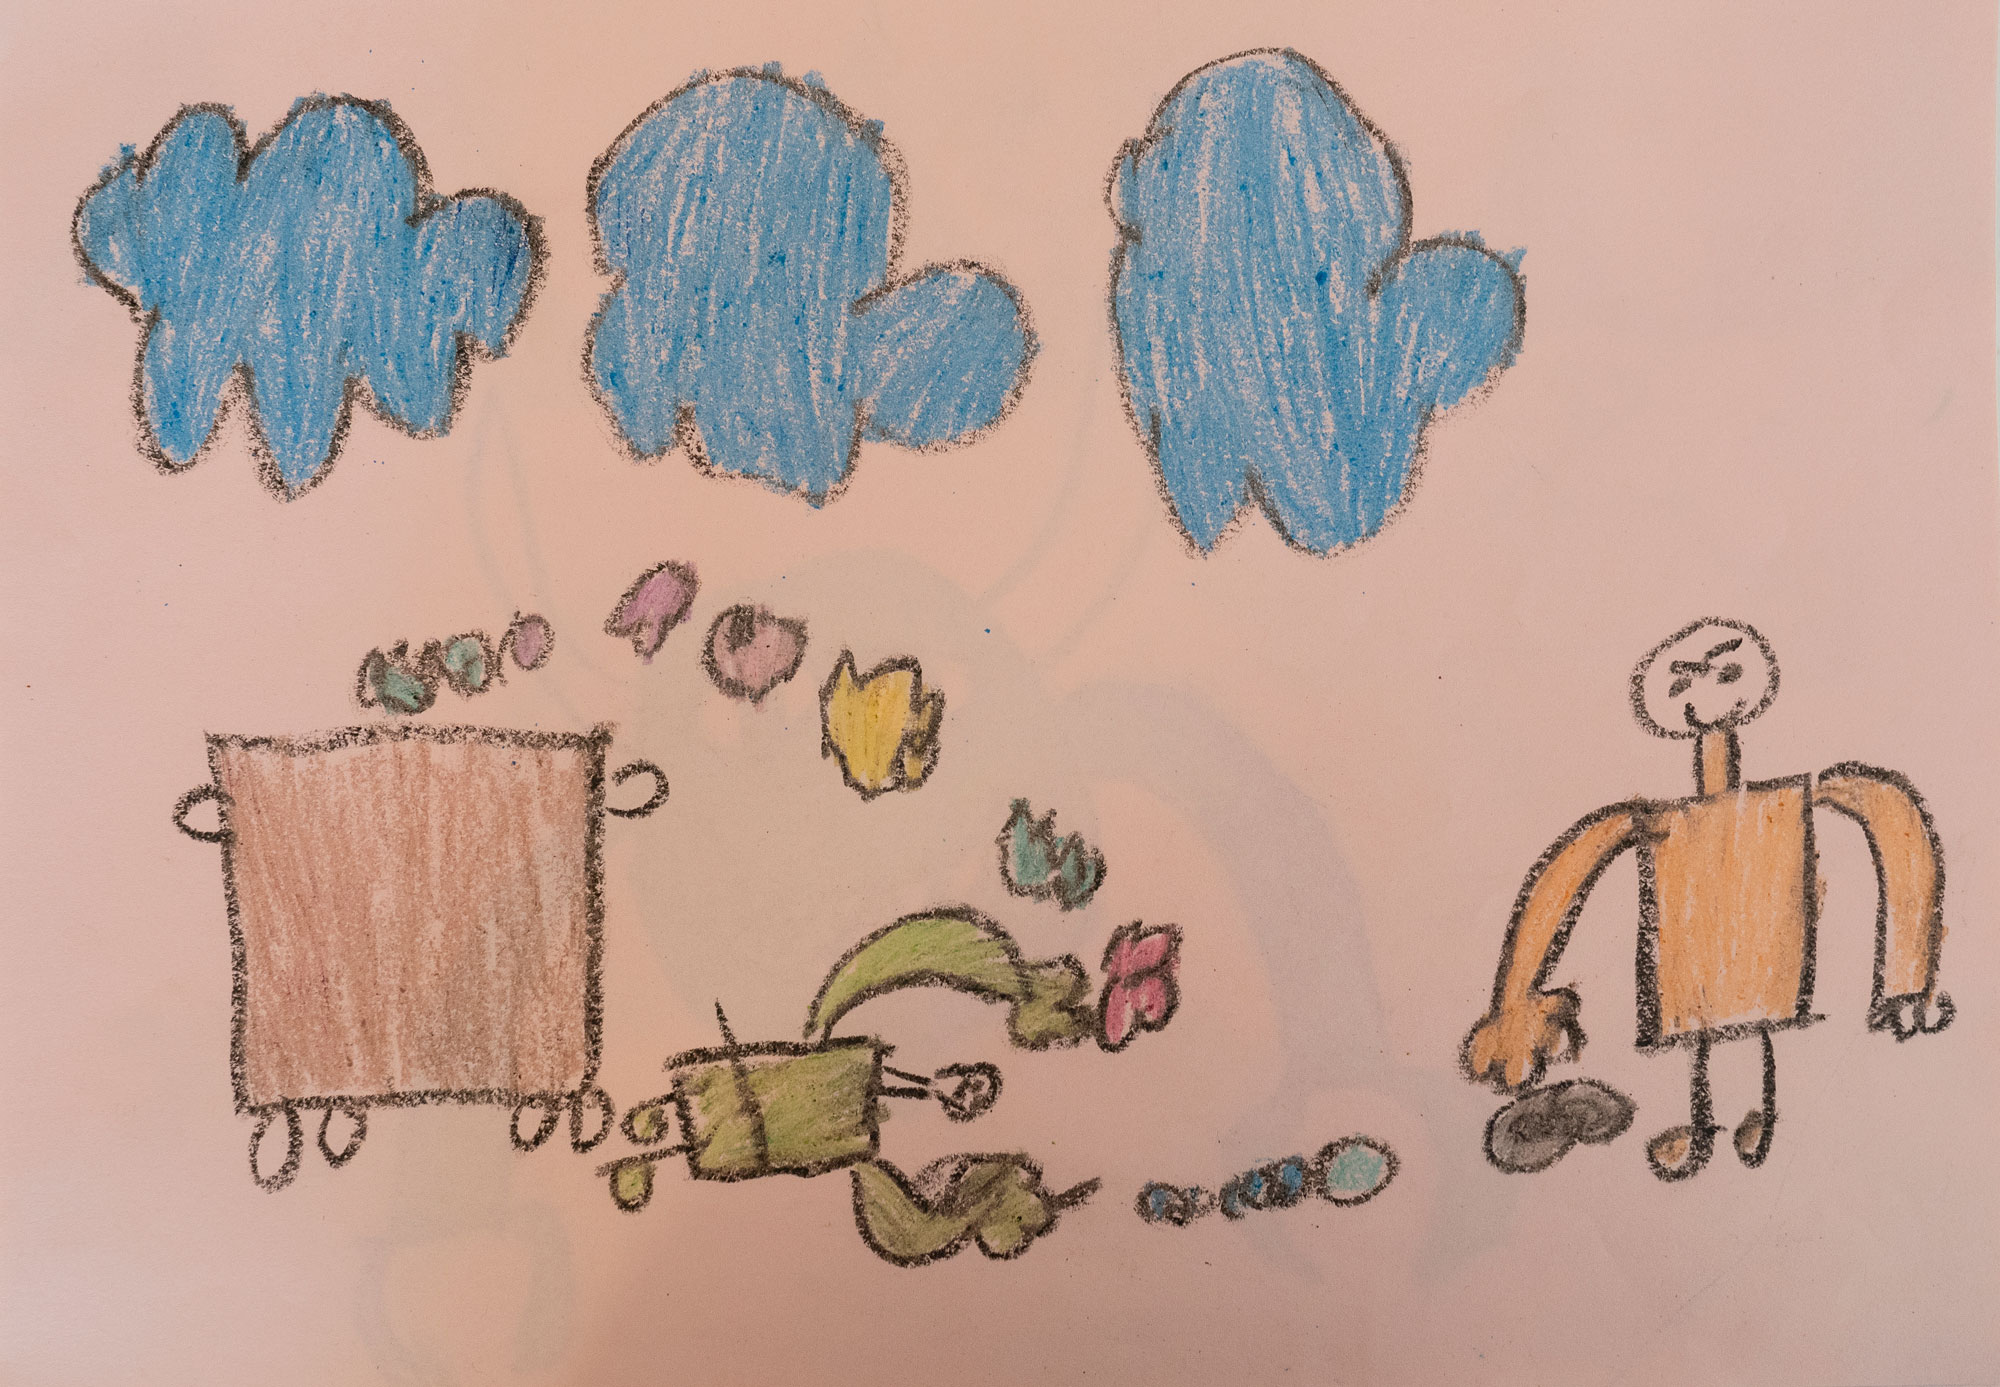 Nine-year-old Yasin drew a picture of people fighting in the camp where he lived on Lesbos.